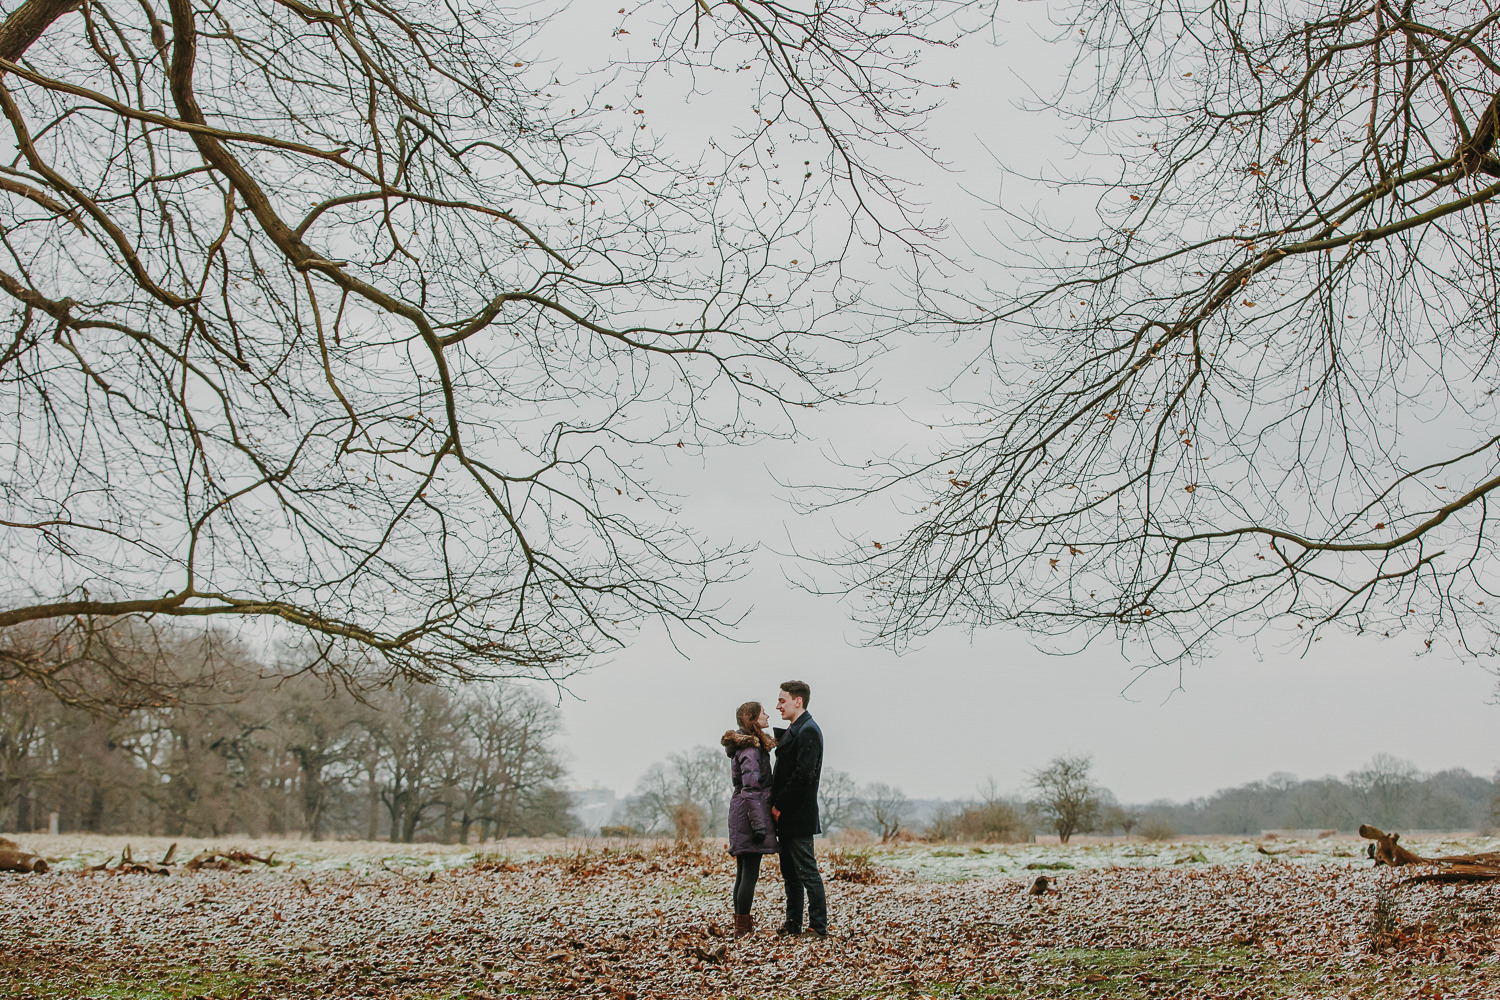 Engaged couple standing underneath trees at Richmond Park London. The ground is covered in snow.